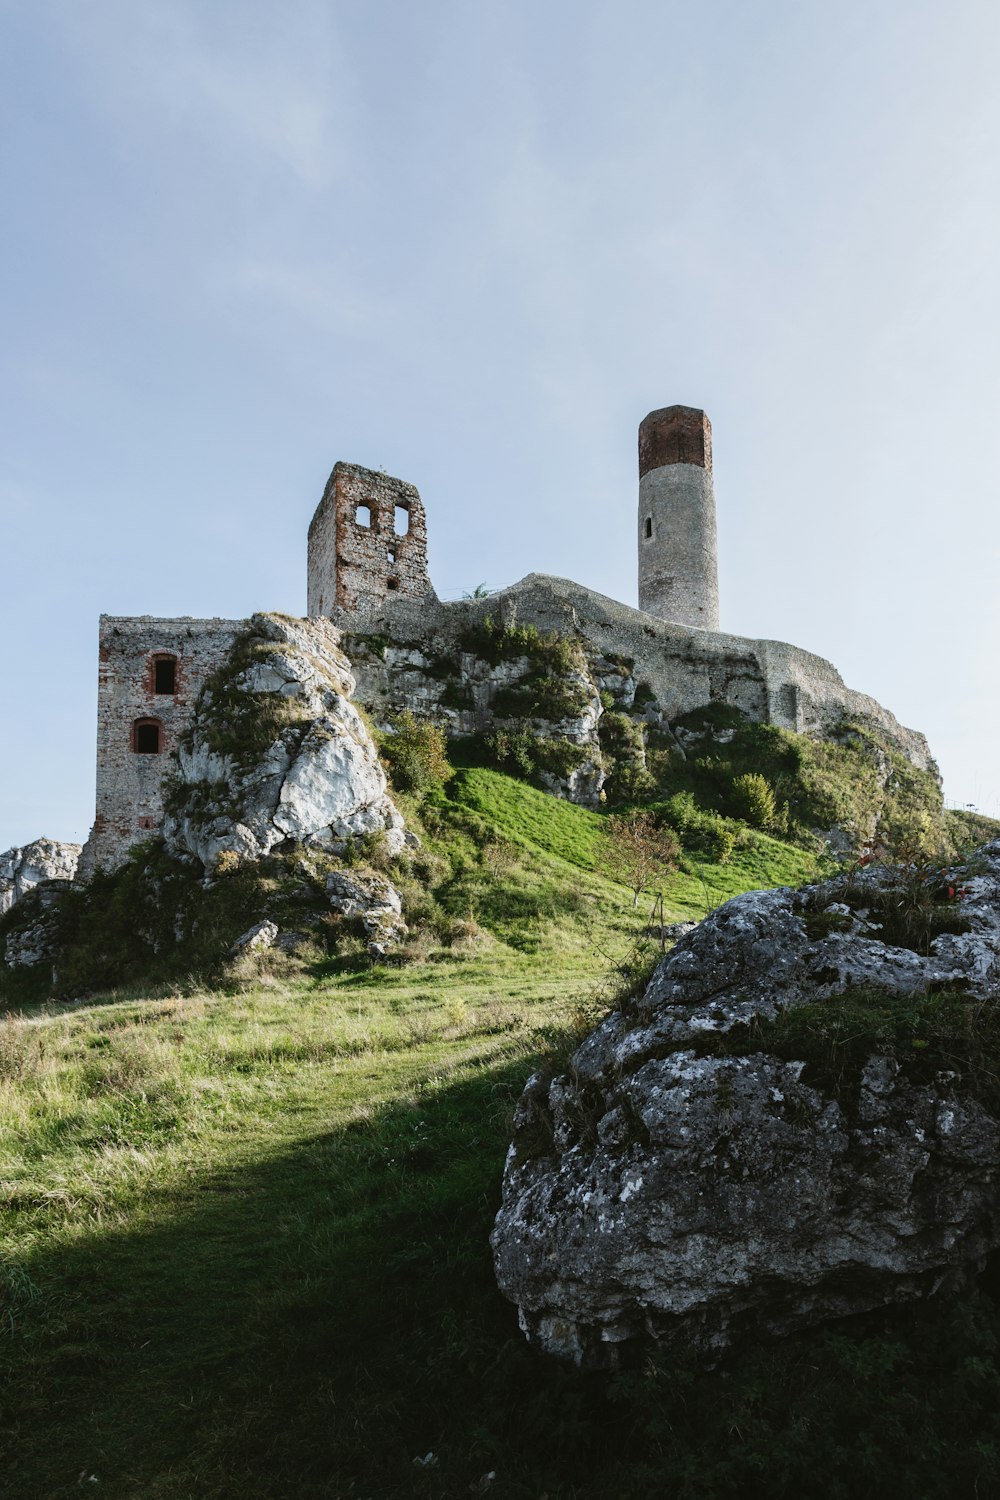 a stone castle on a hill with Ogrodzieniec Castle in the background